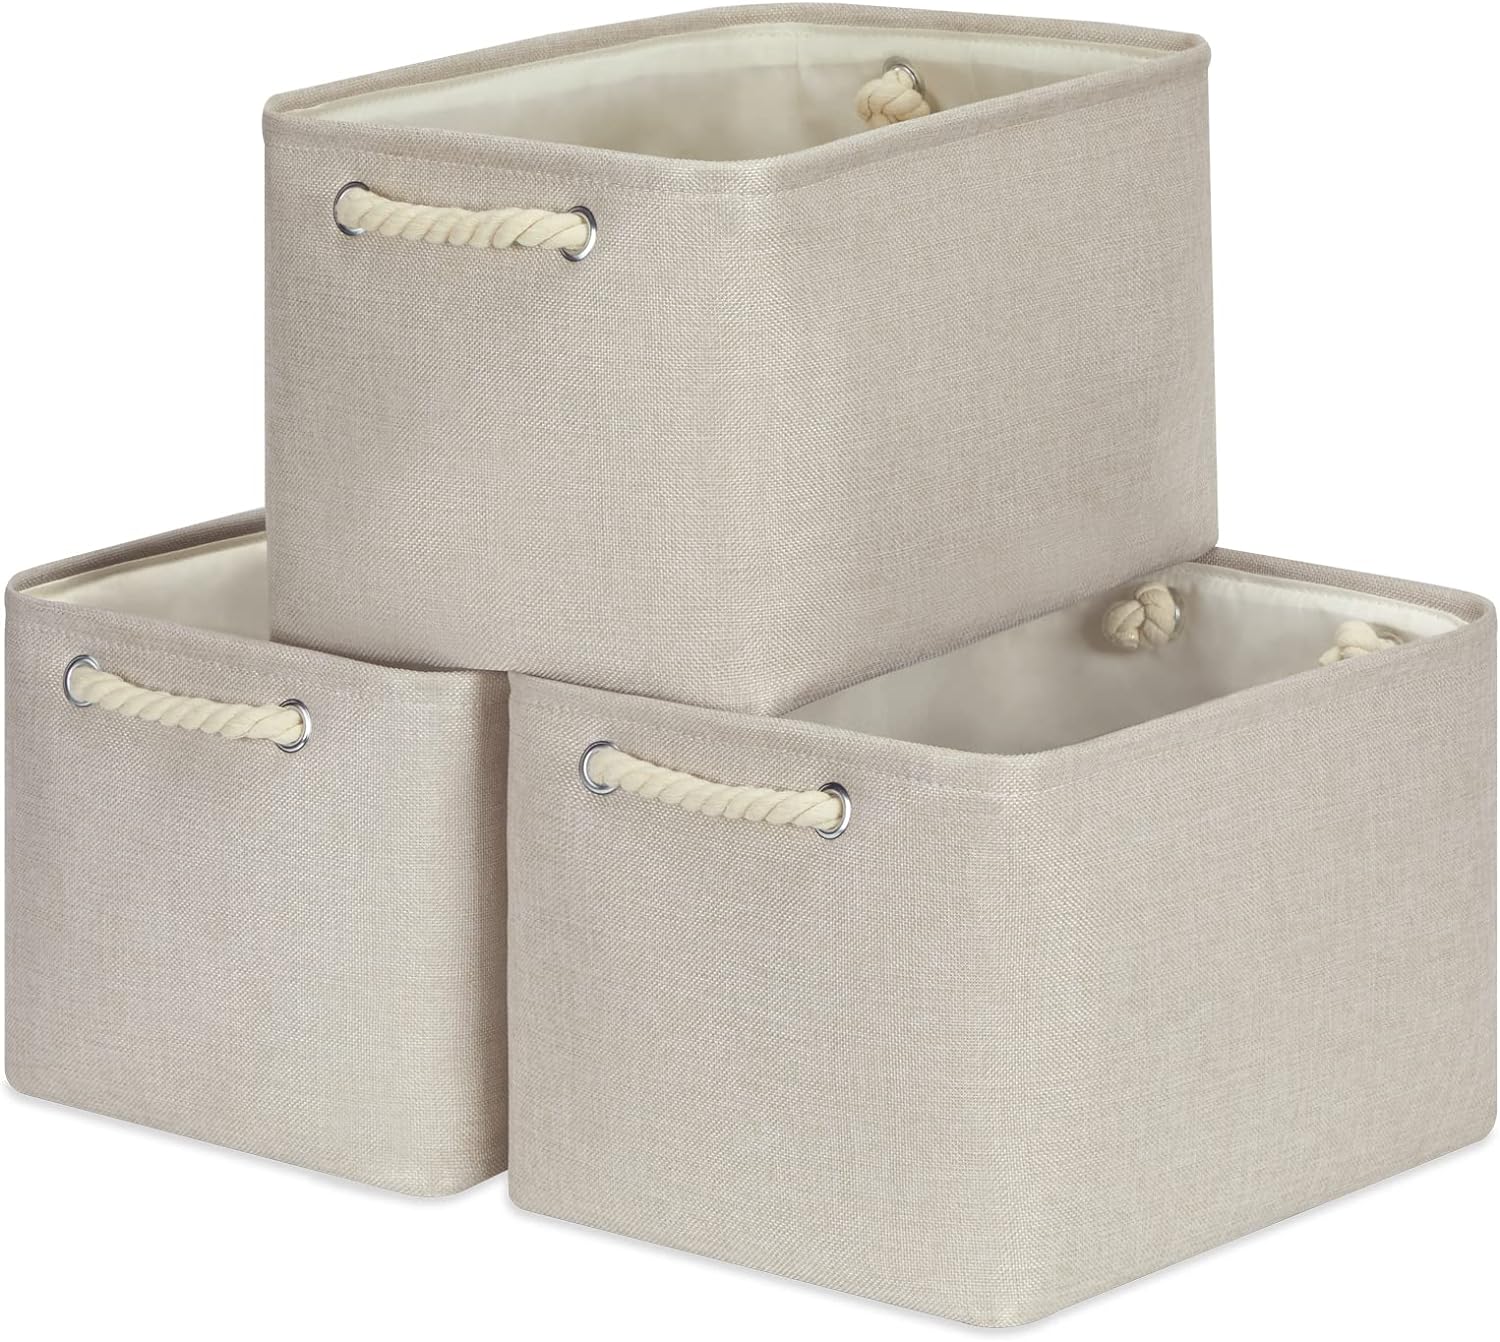 Temary Storage Baskets Fabric Bins for Closet, 3Pack Canvas Storage Basket Decorative Storage Boxes with Rope Handles for Organizing Toys, Baby Clothes, Books (Beige,15Lx11Wx9.5H Inches)